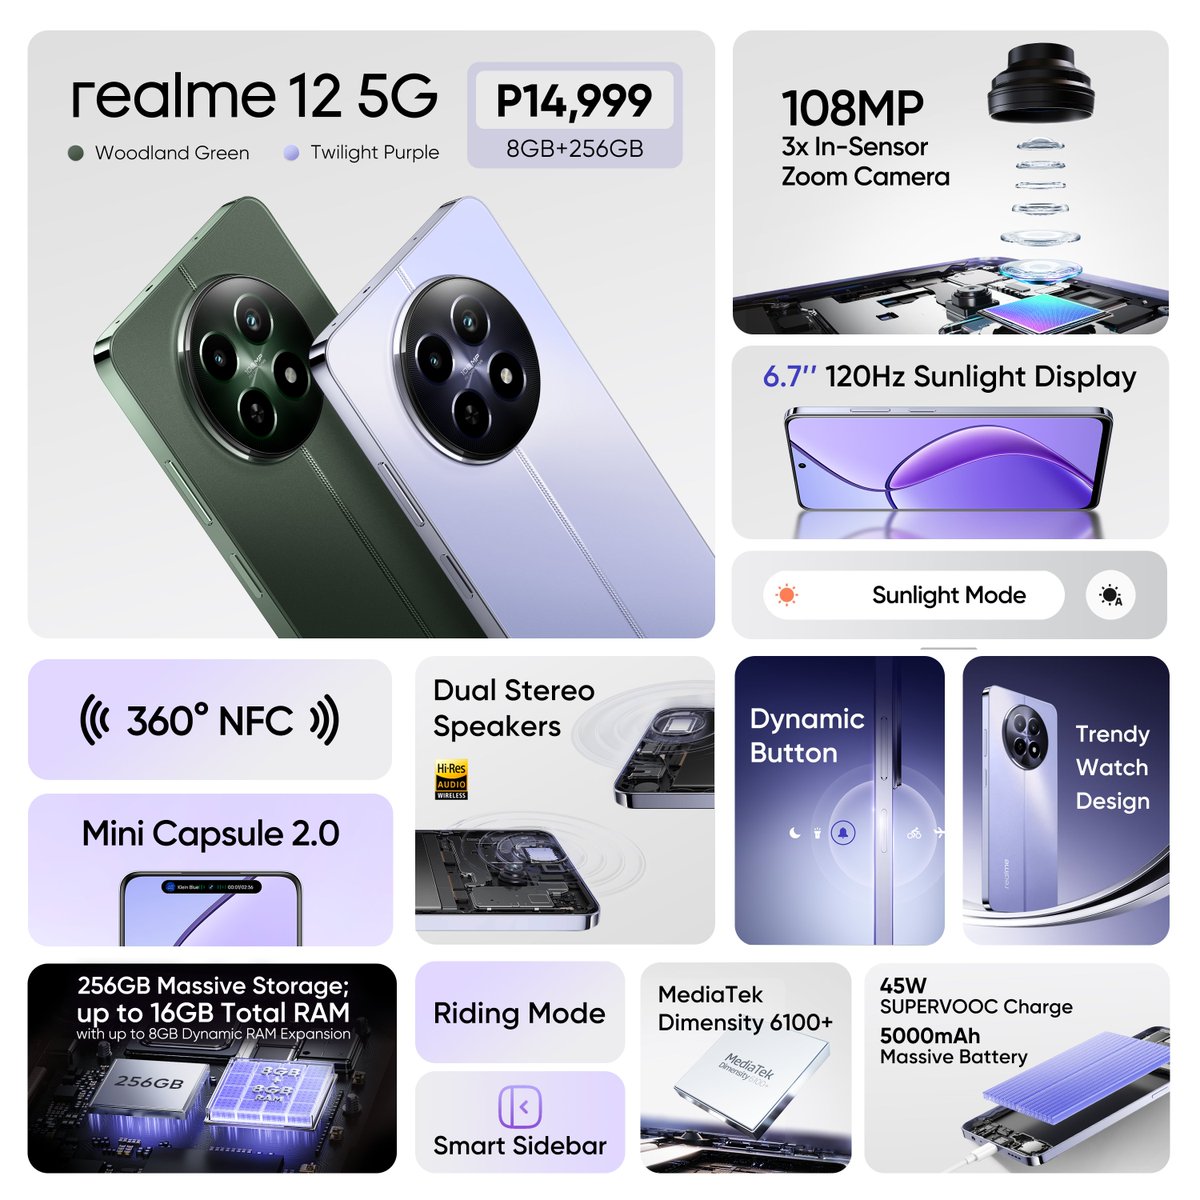 Our #realme125G is only P14,999!